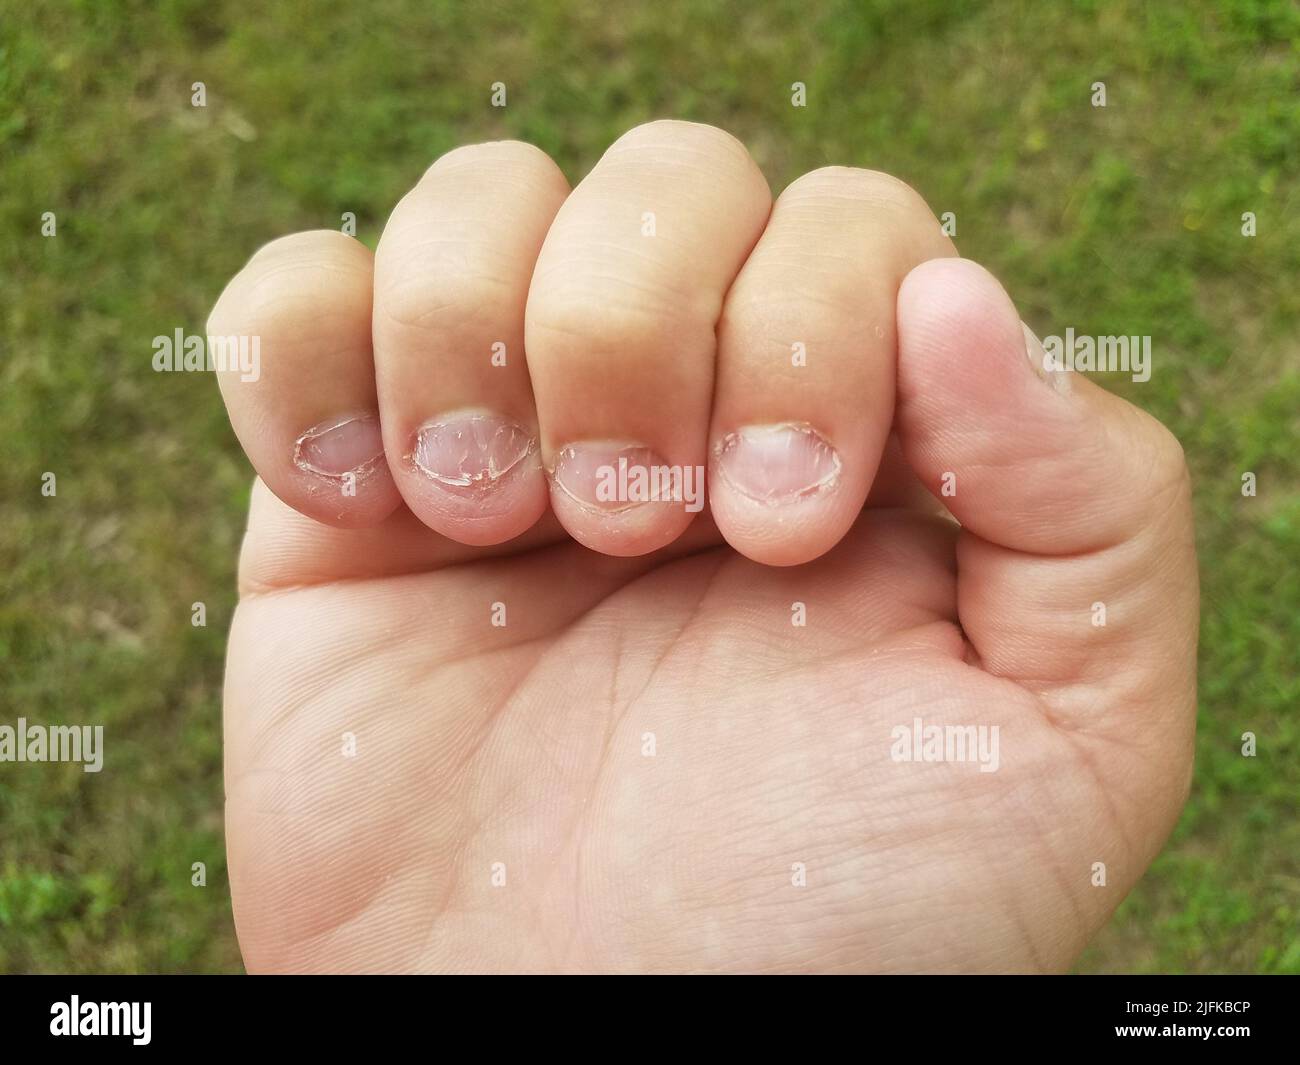 disgusting bitten and chewed fingernails on man's hand. Stock Photo